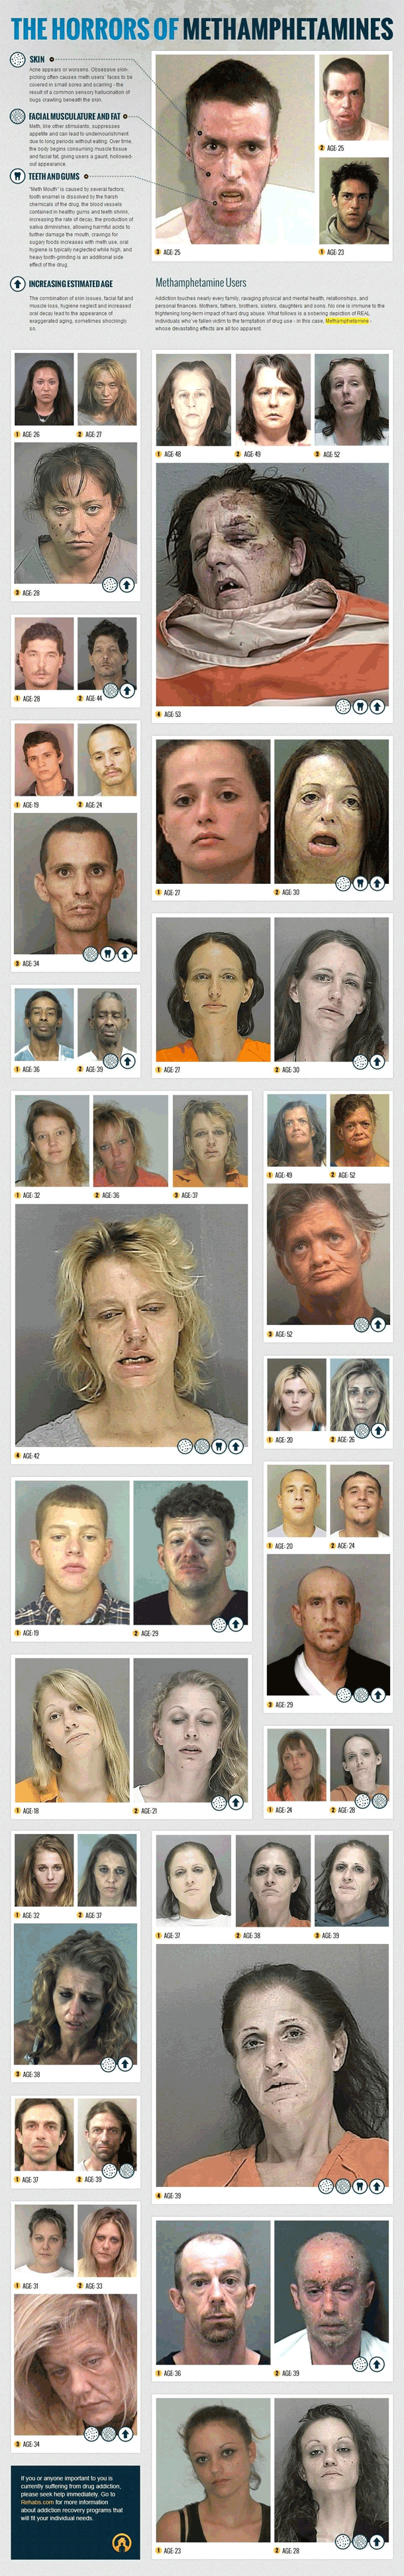 Meth Users - Horrific Before & After Photographs 